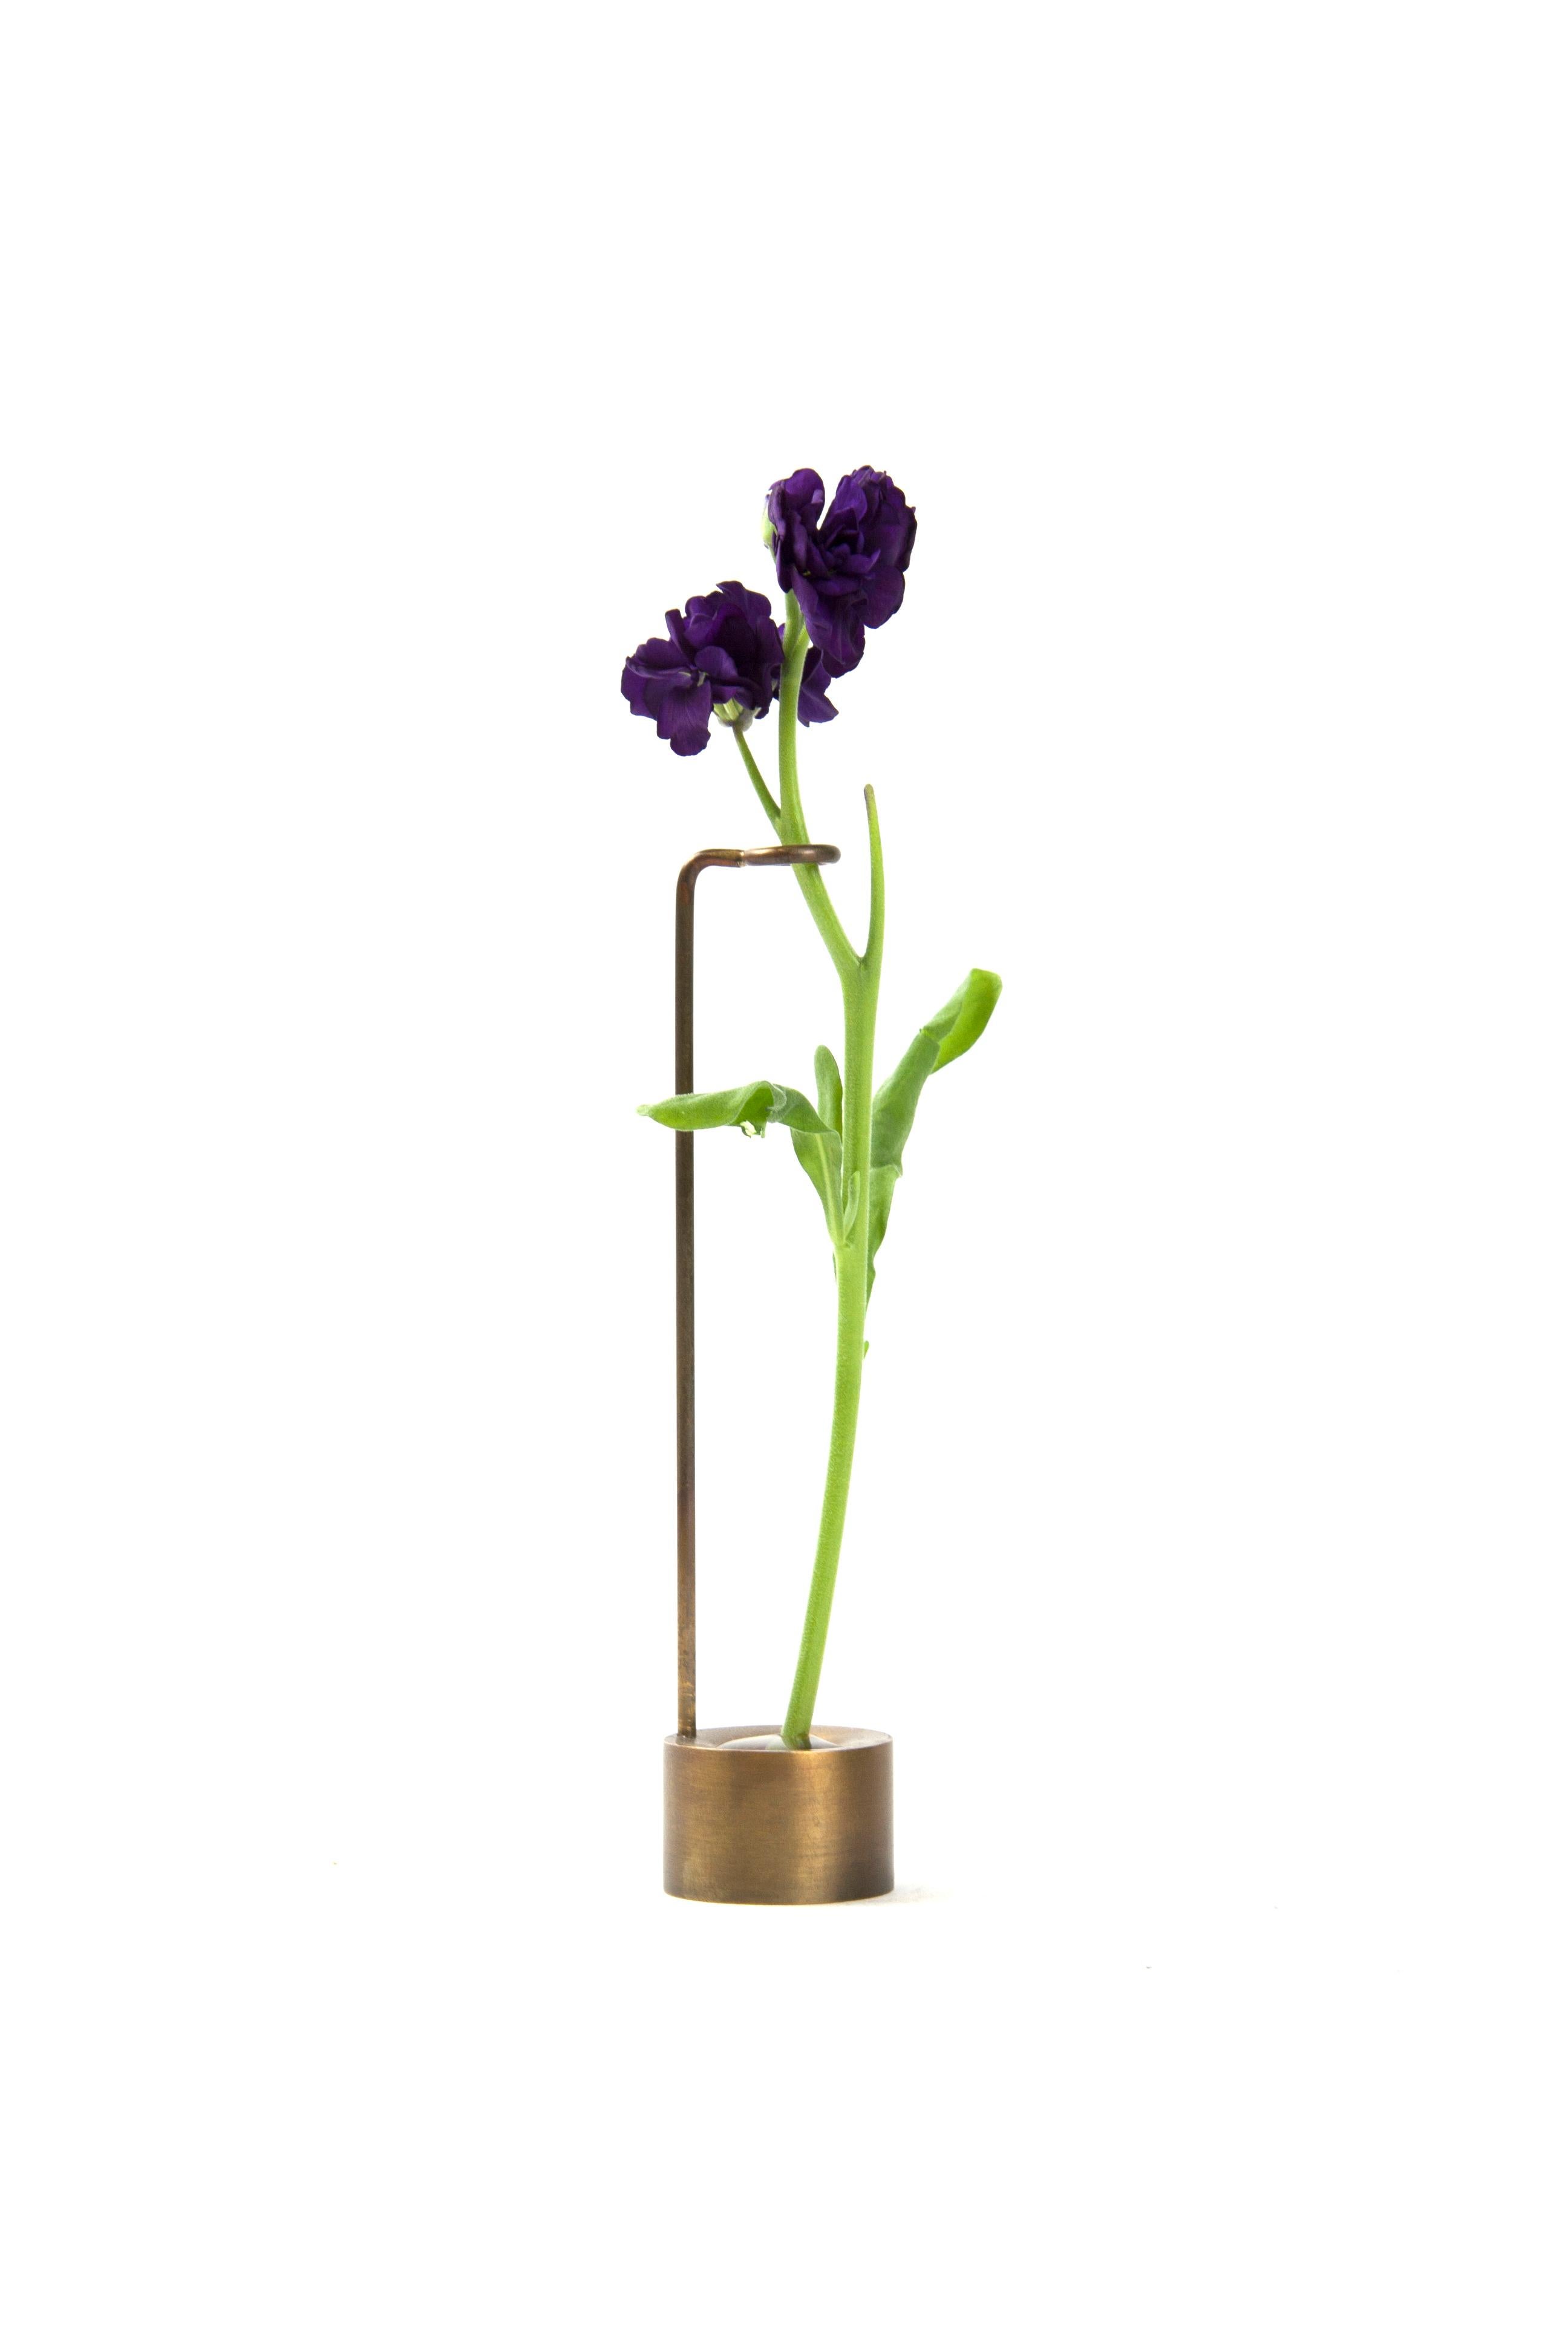 Brass Bud vase II by Gentner Design
Dimensions: D 5 x W 5 x H 15.2 cm
Materials: dull tarnished brass

Each of these delicately, handcrafted Bud Vases is perfect as an individual home accessory or whimsical series. Made of brass and hand tarnished,